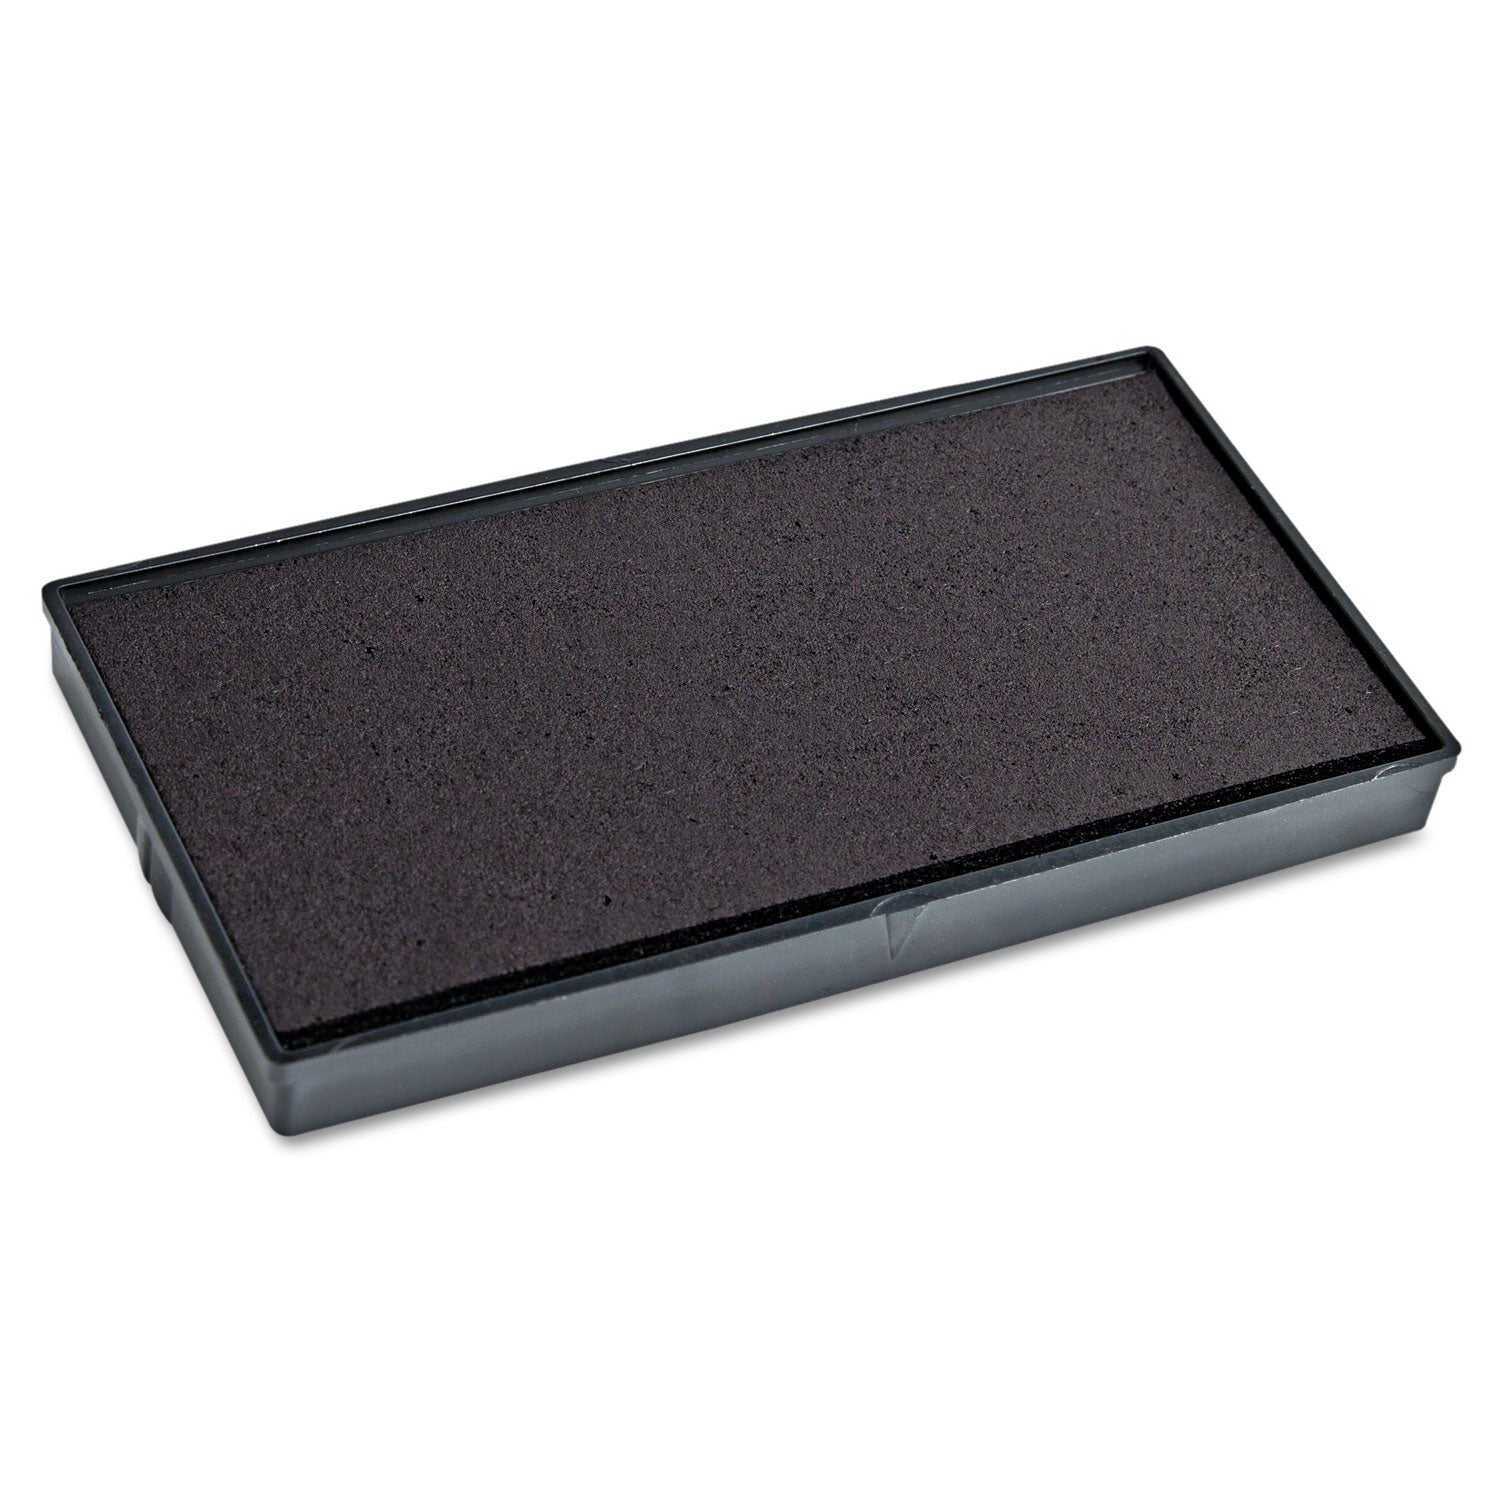 Replacement Ink Pad for 2000PLUS 1SI10P, 1" x 0.25", Black - 